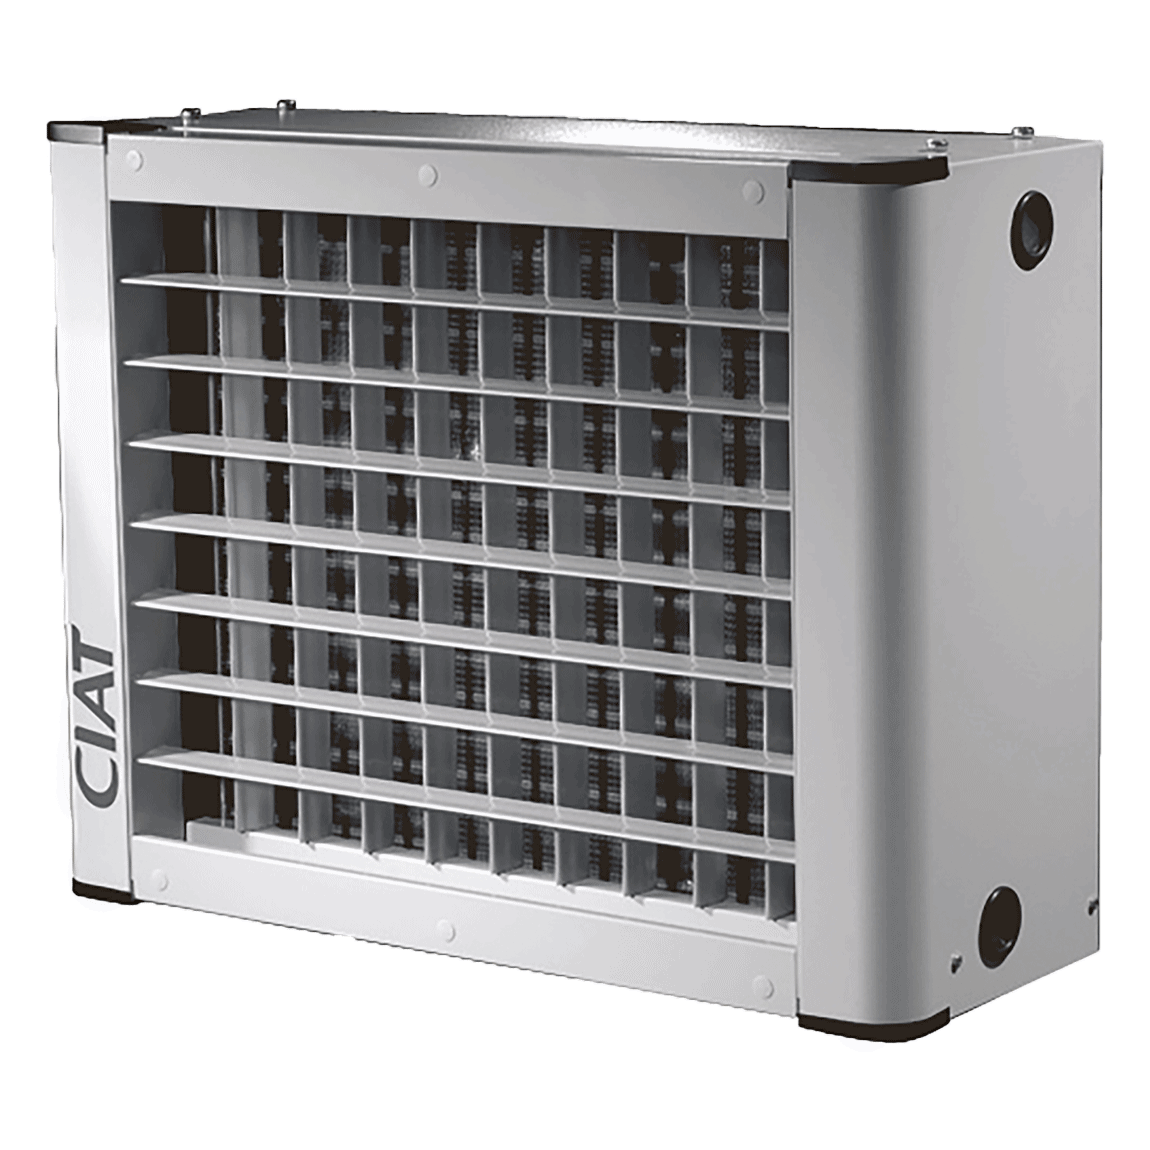 ciat-heliotherme-4000-axial-air-heater